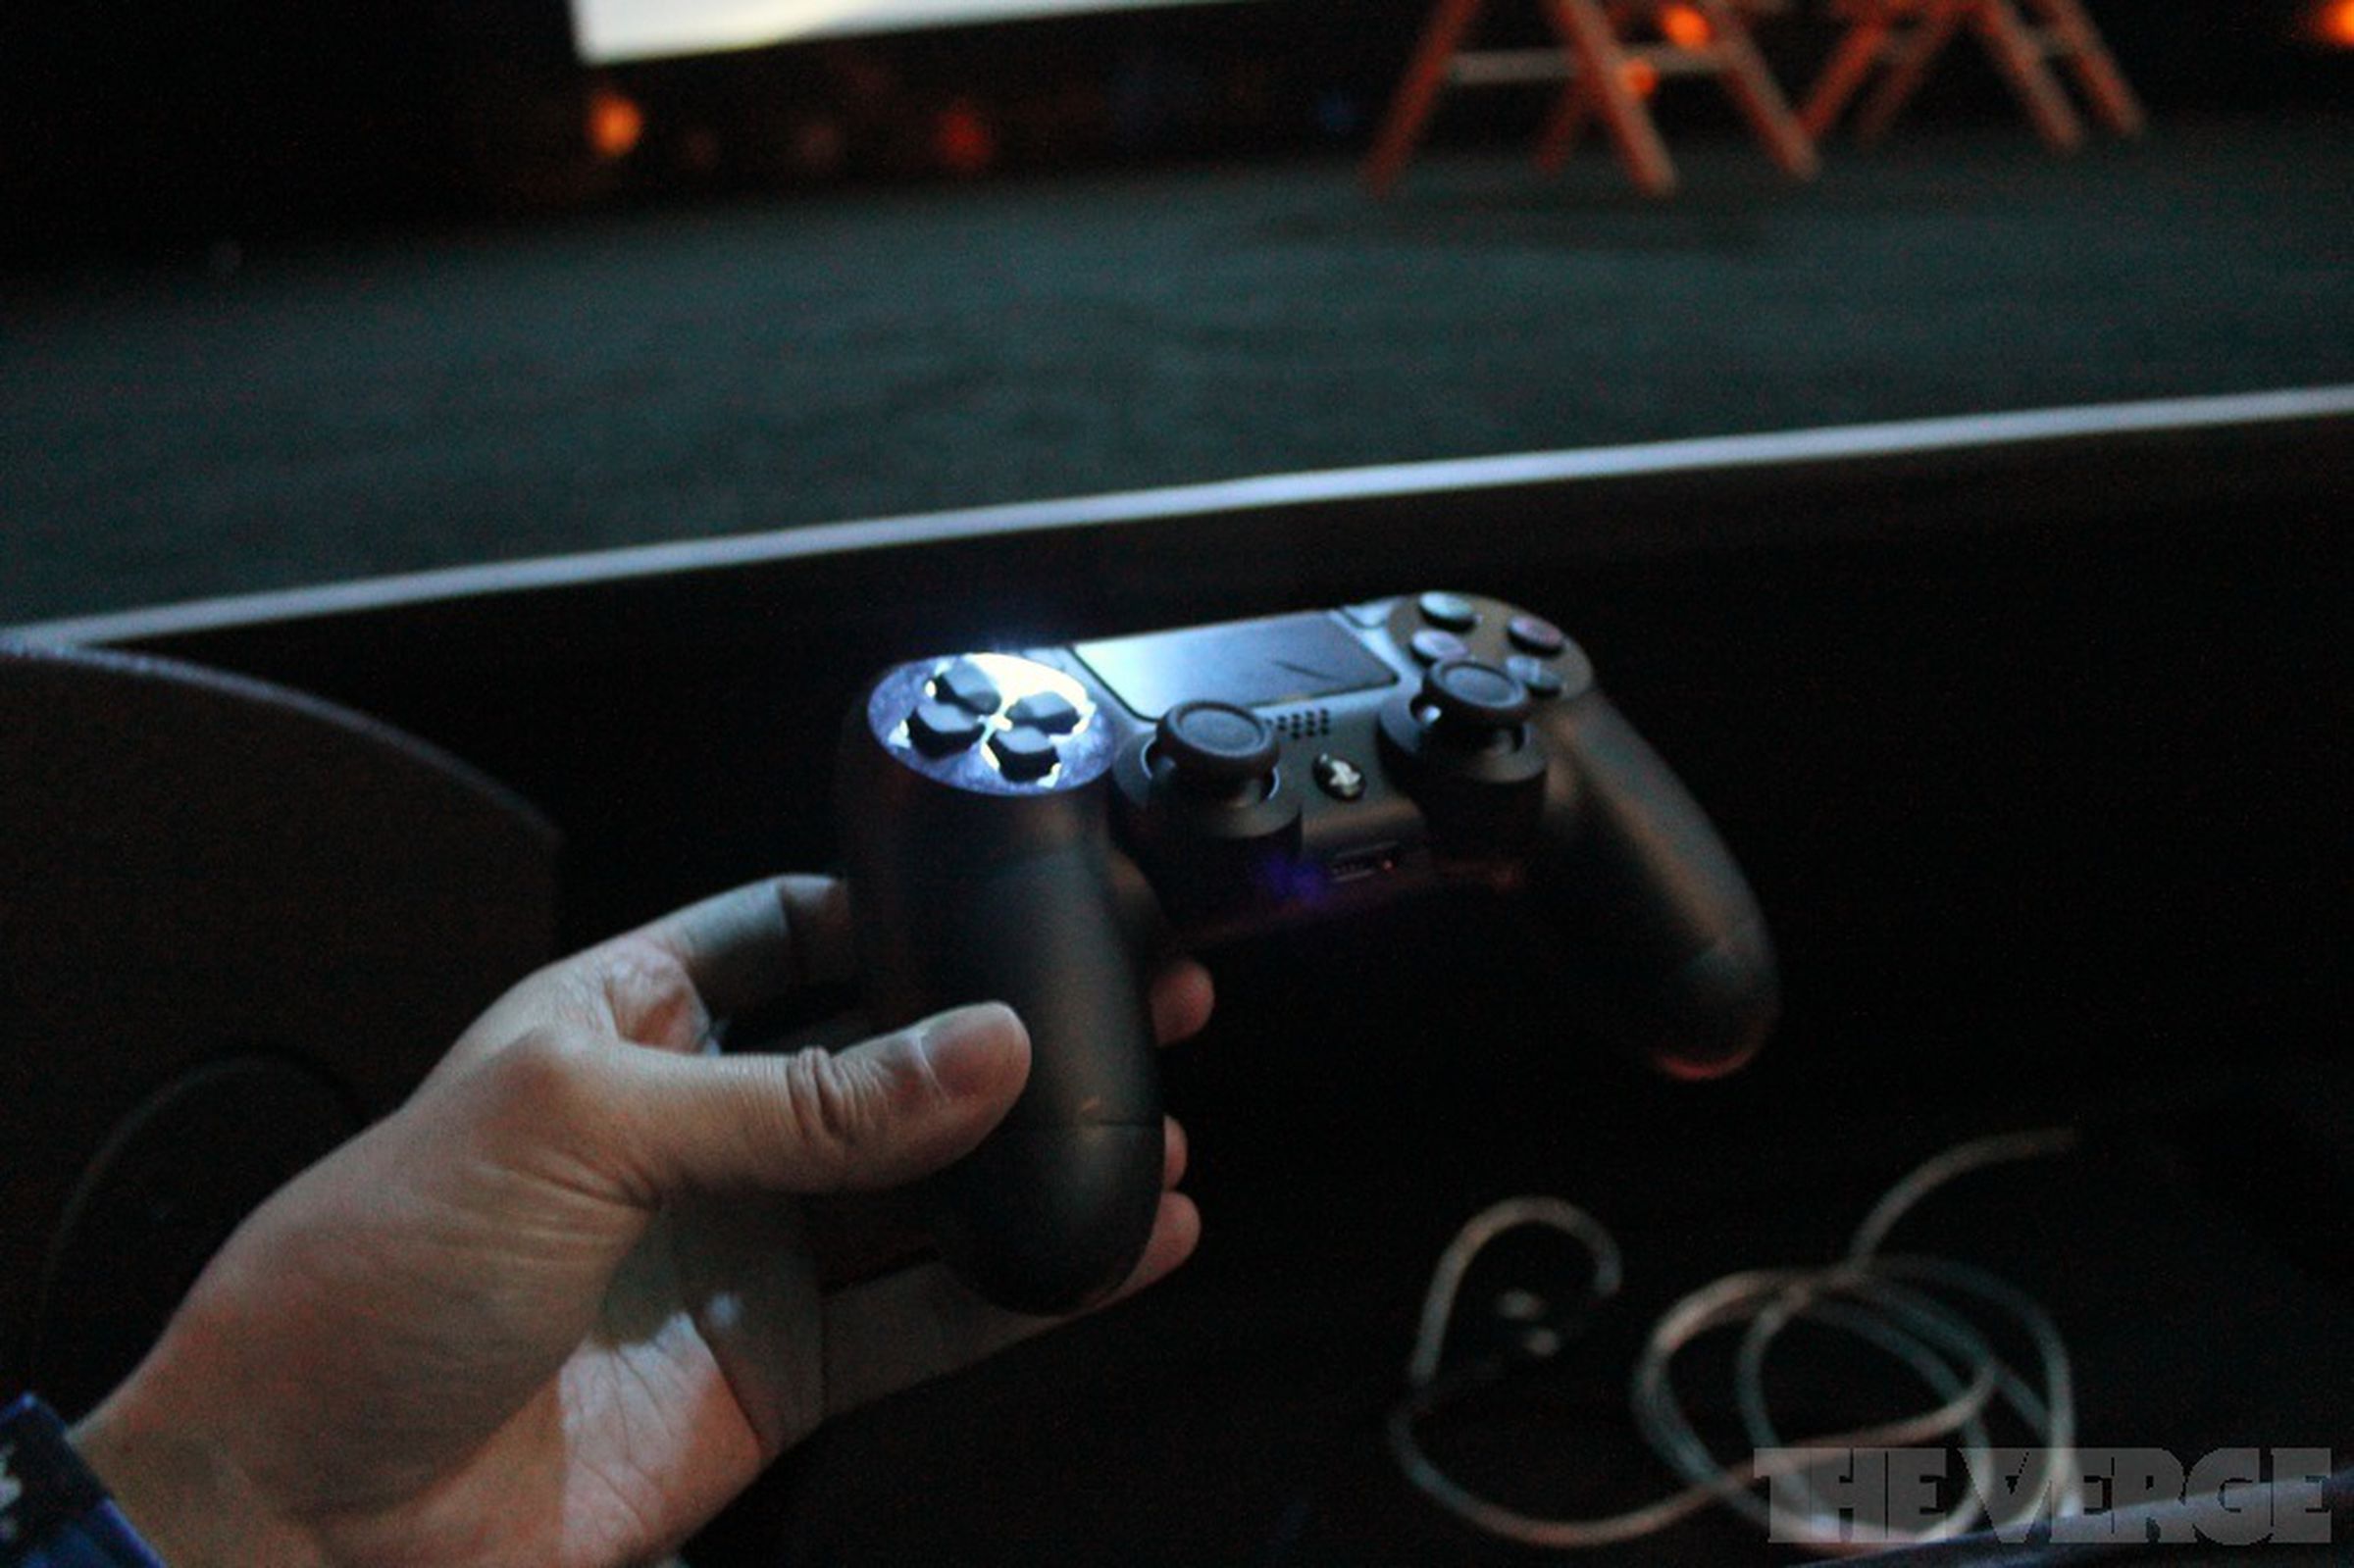 Sony PlayStation 4 controller hands-on images